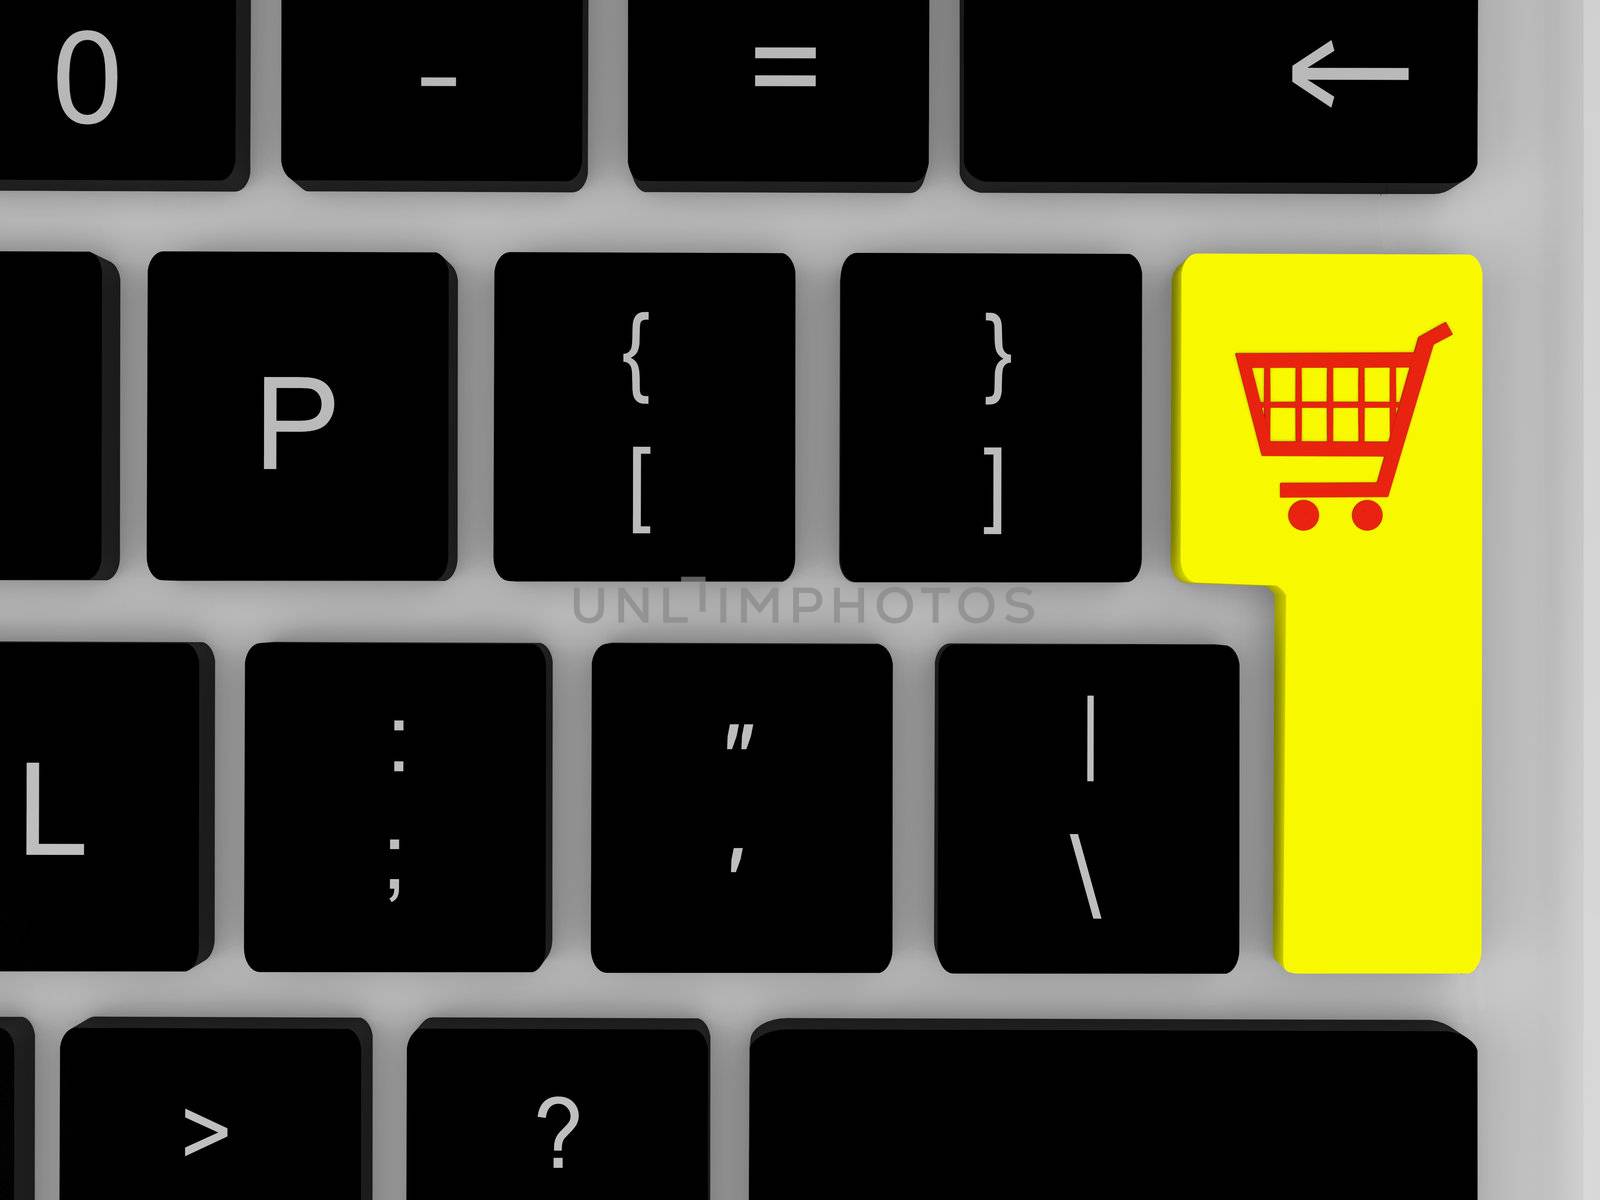 Shopping trolley on enter key by Harvepino